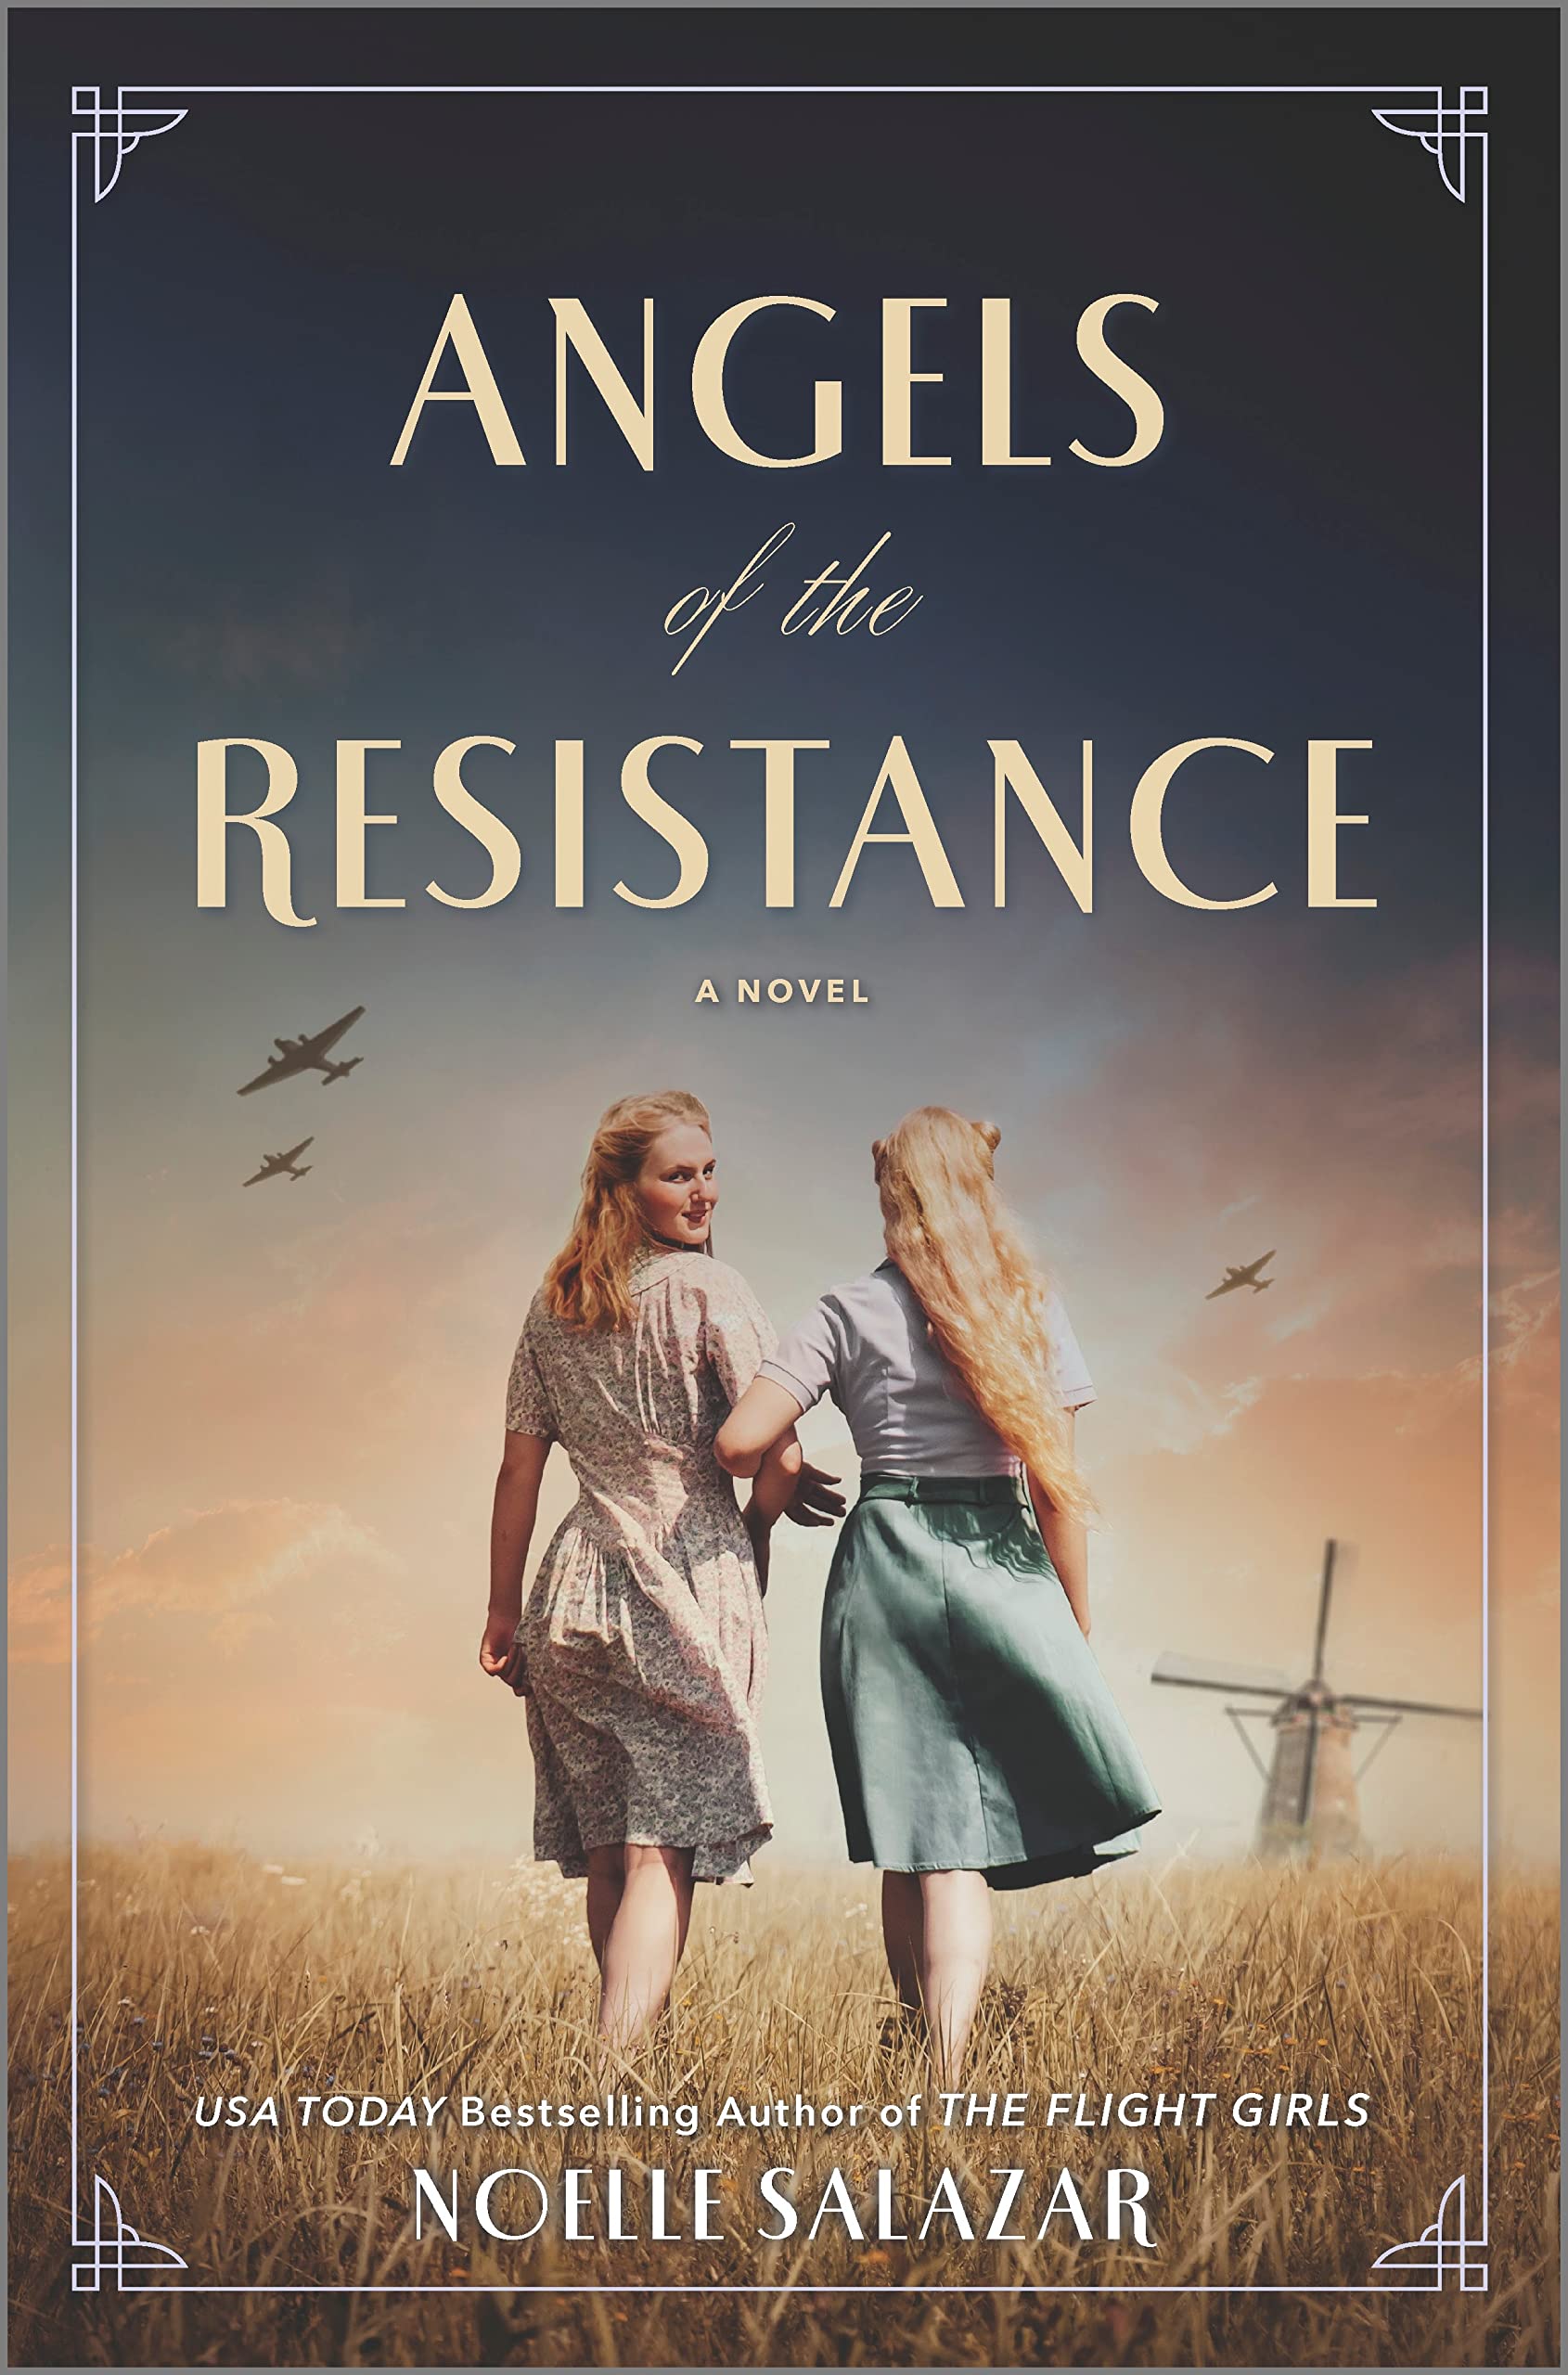 Image for "Angels of the Resistance: A WWII Novel"